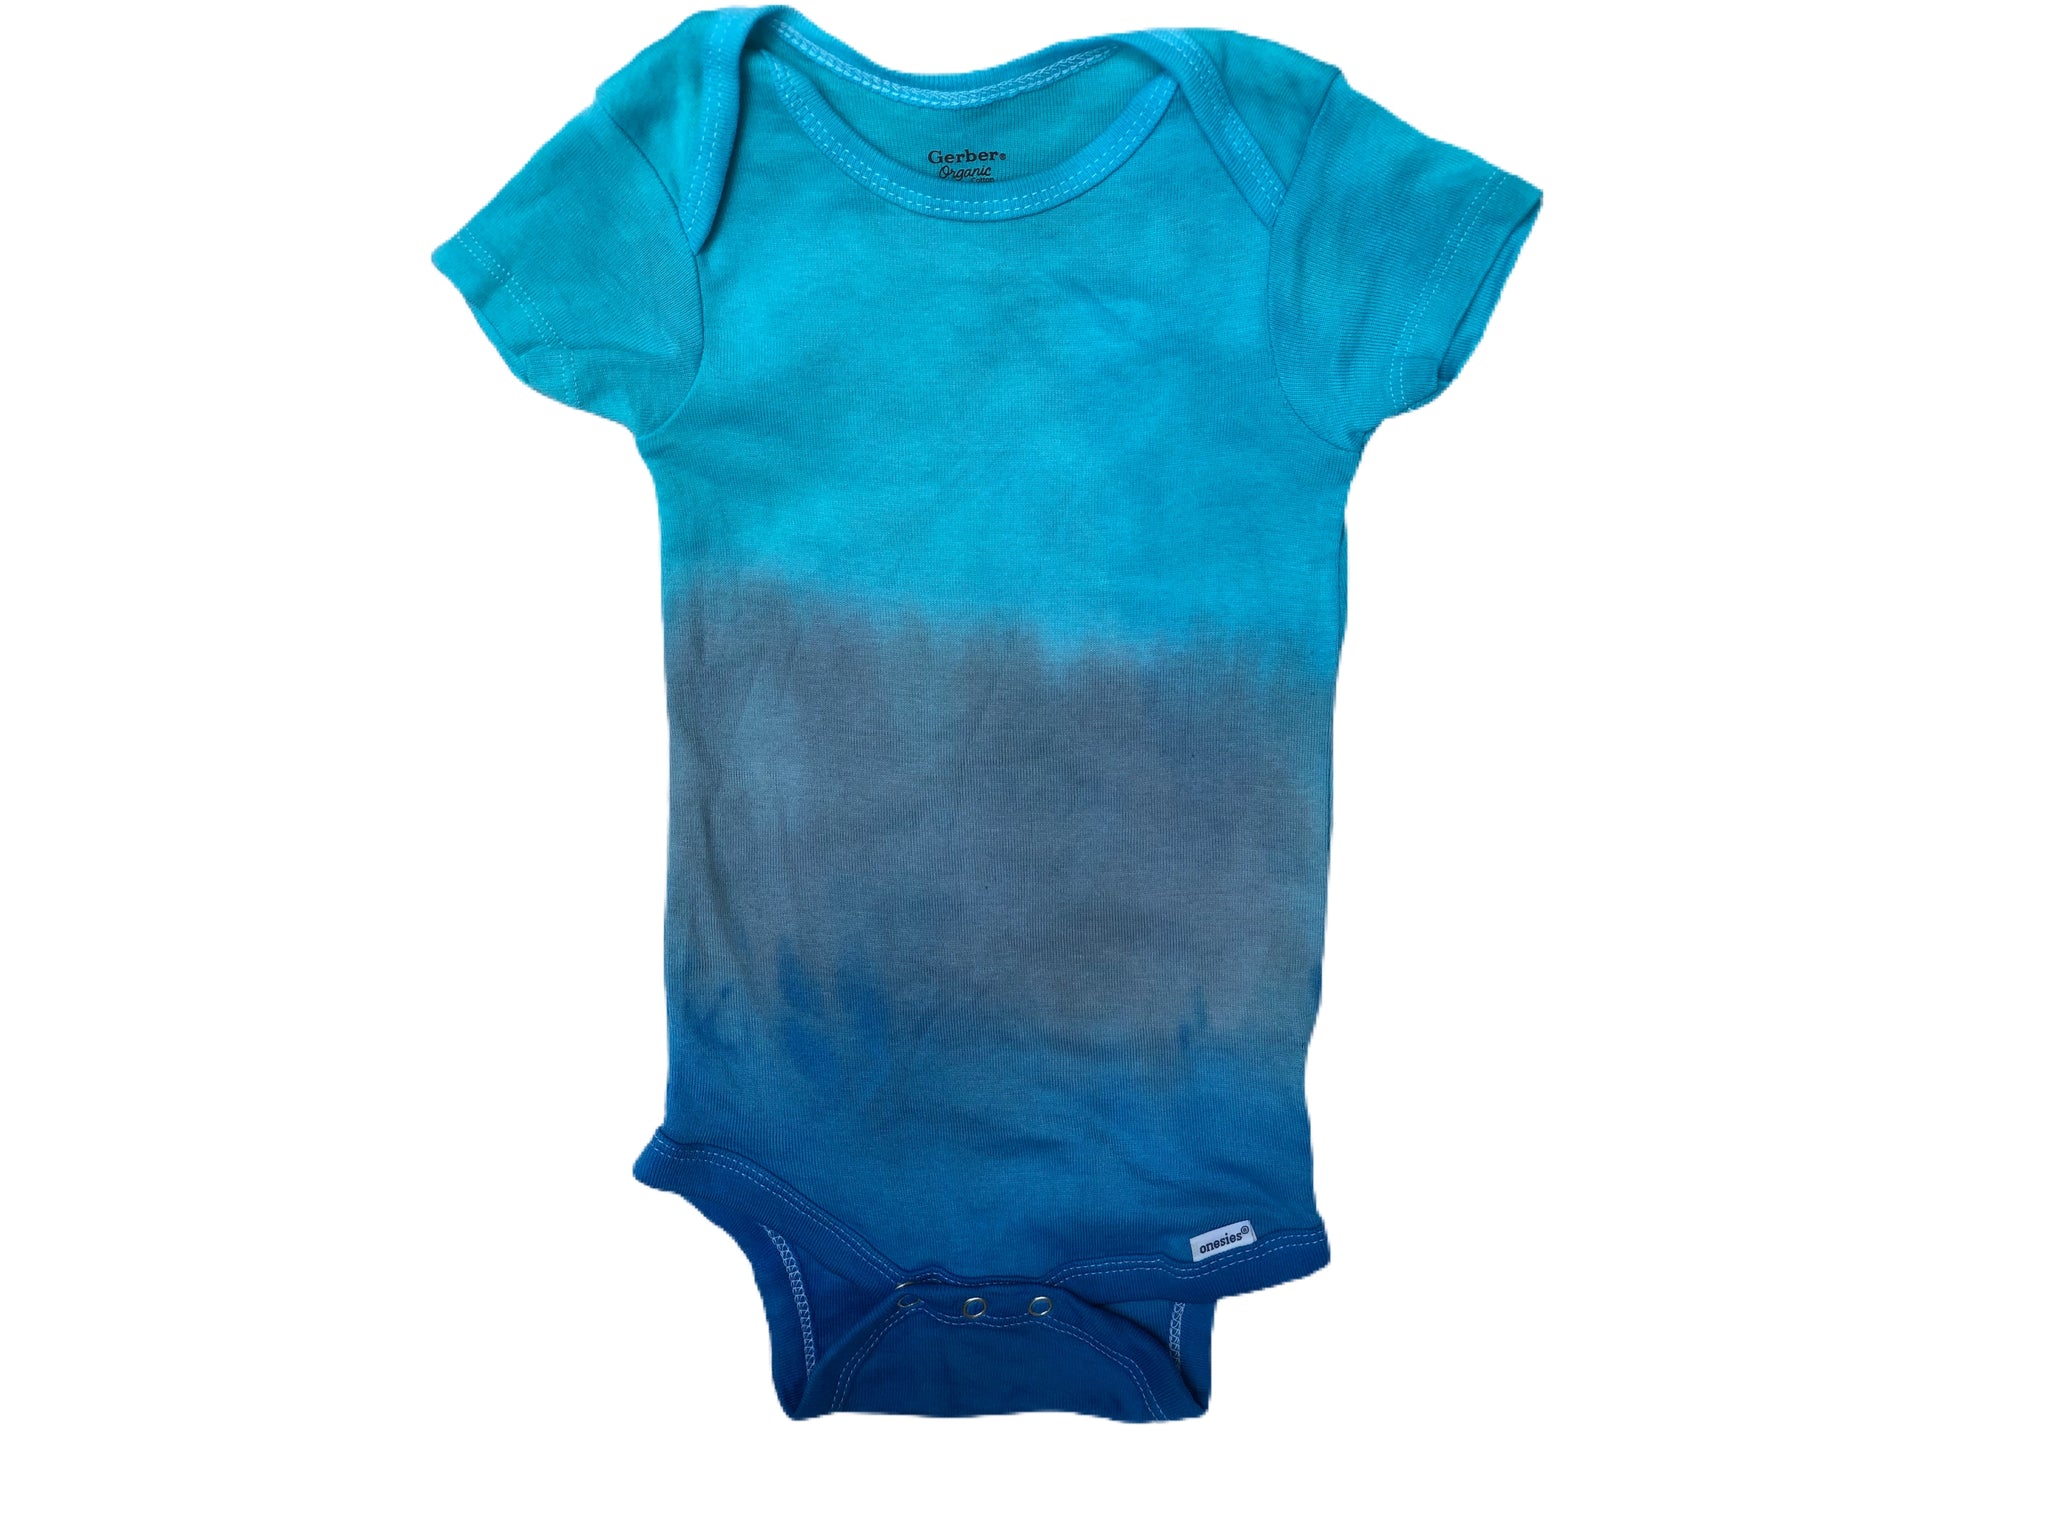 How To Ombre Tie Dye - Tie Dye And Teal